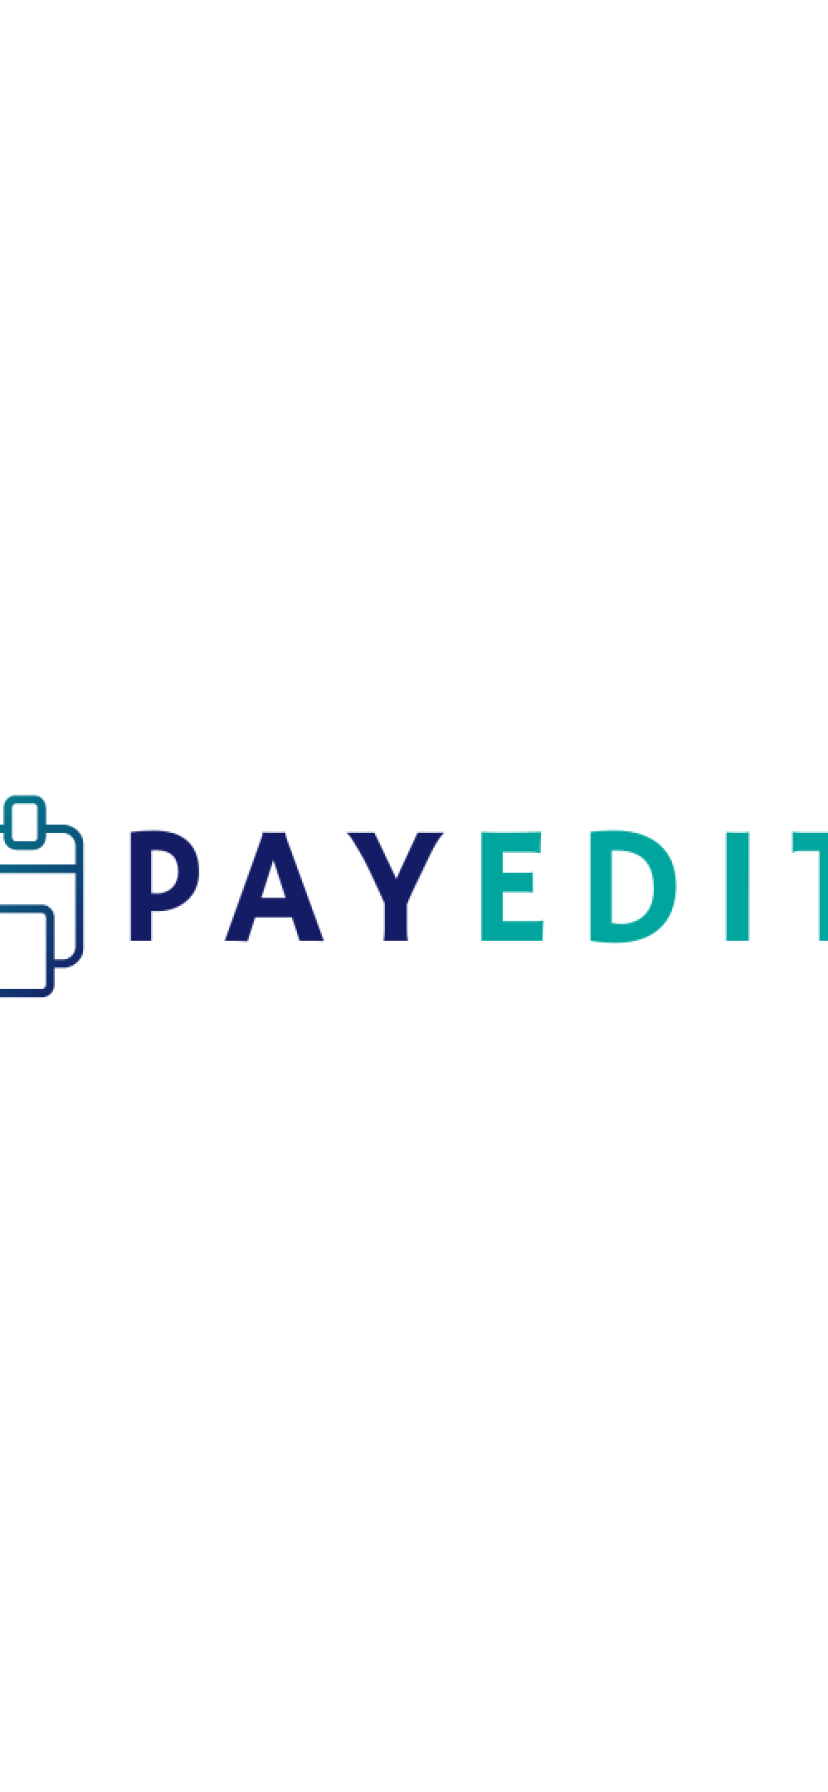 Payedit.com domain name for sale